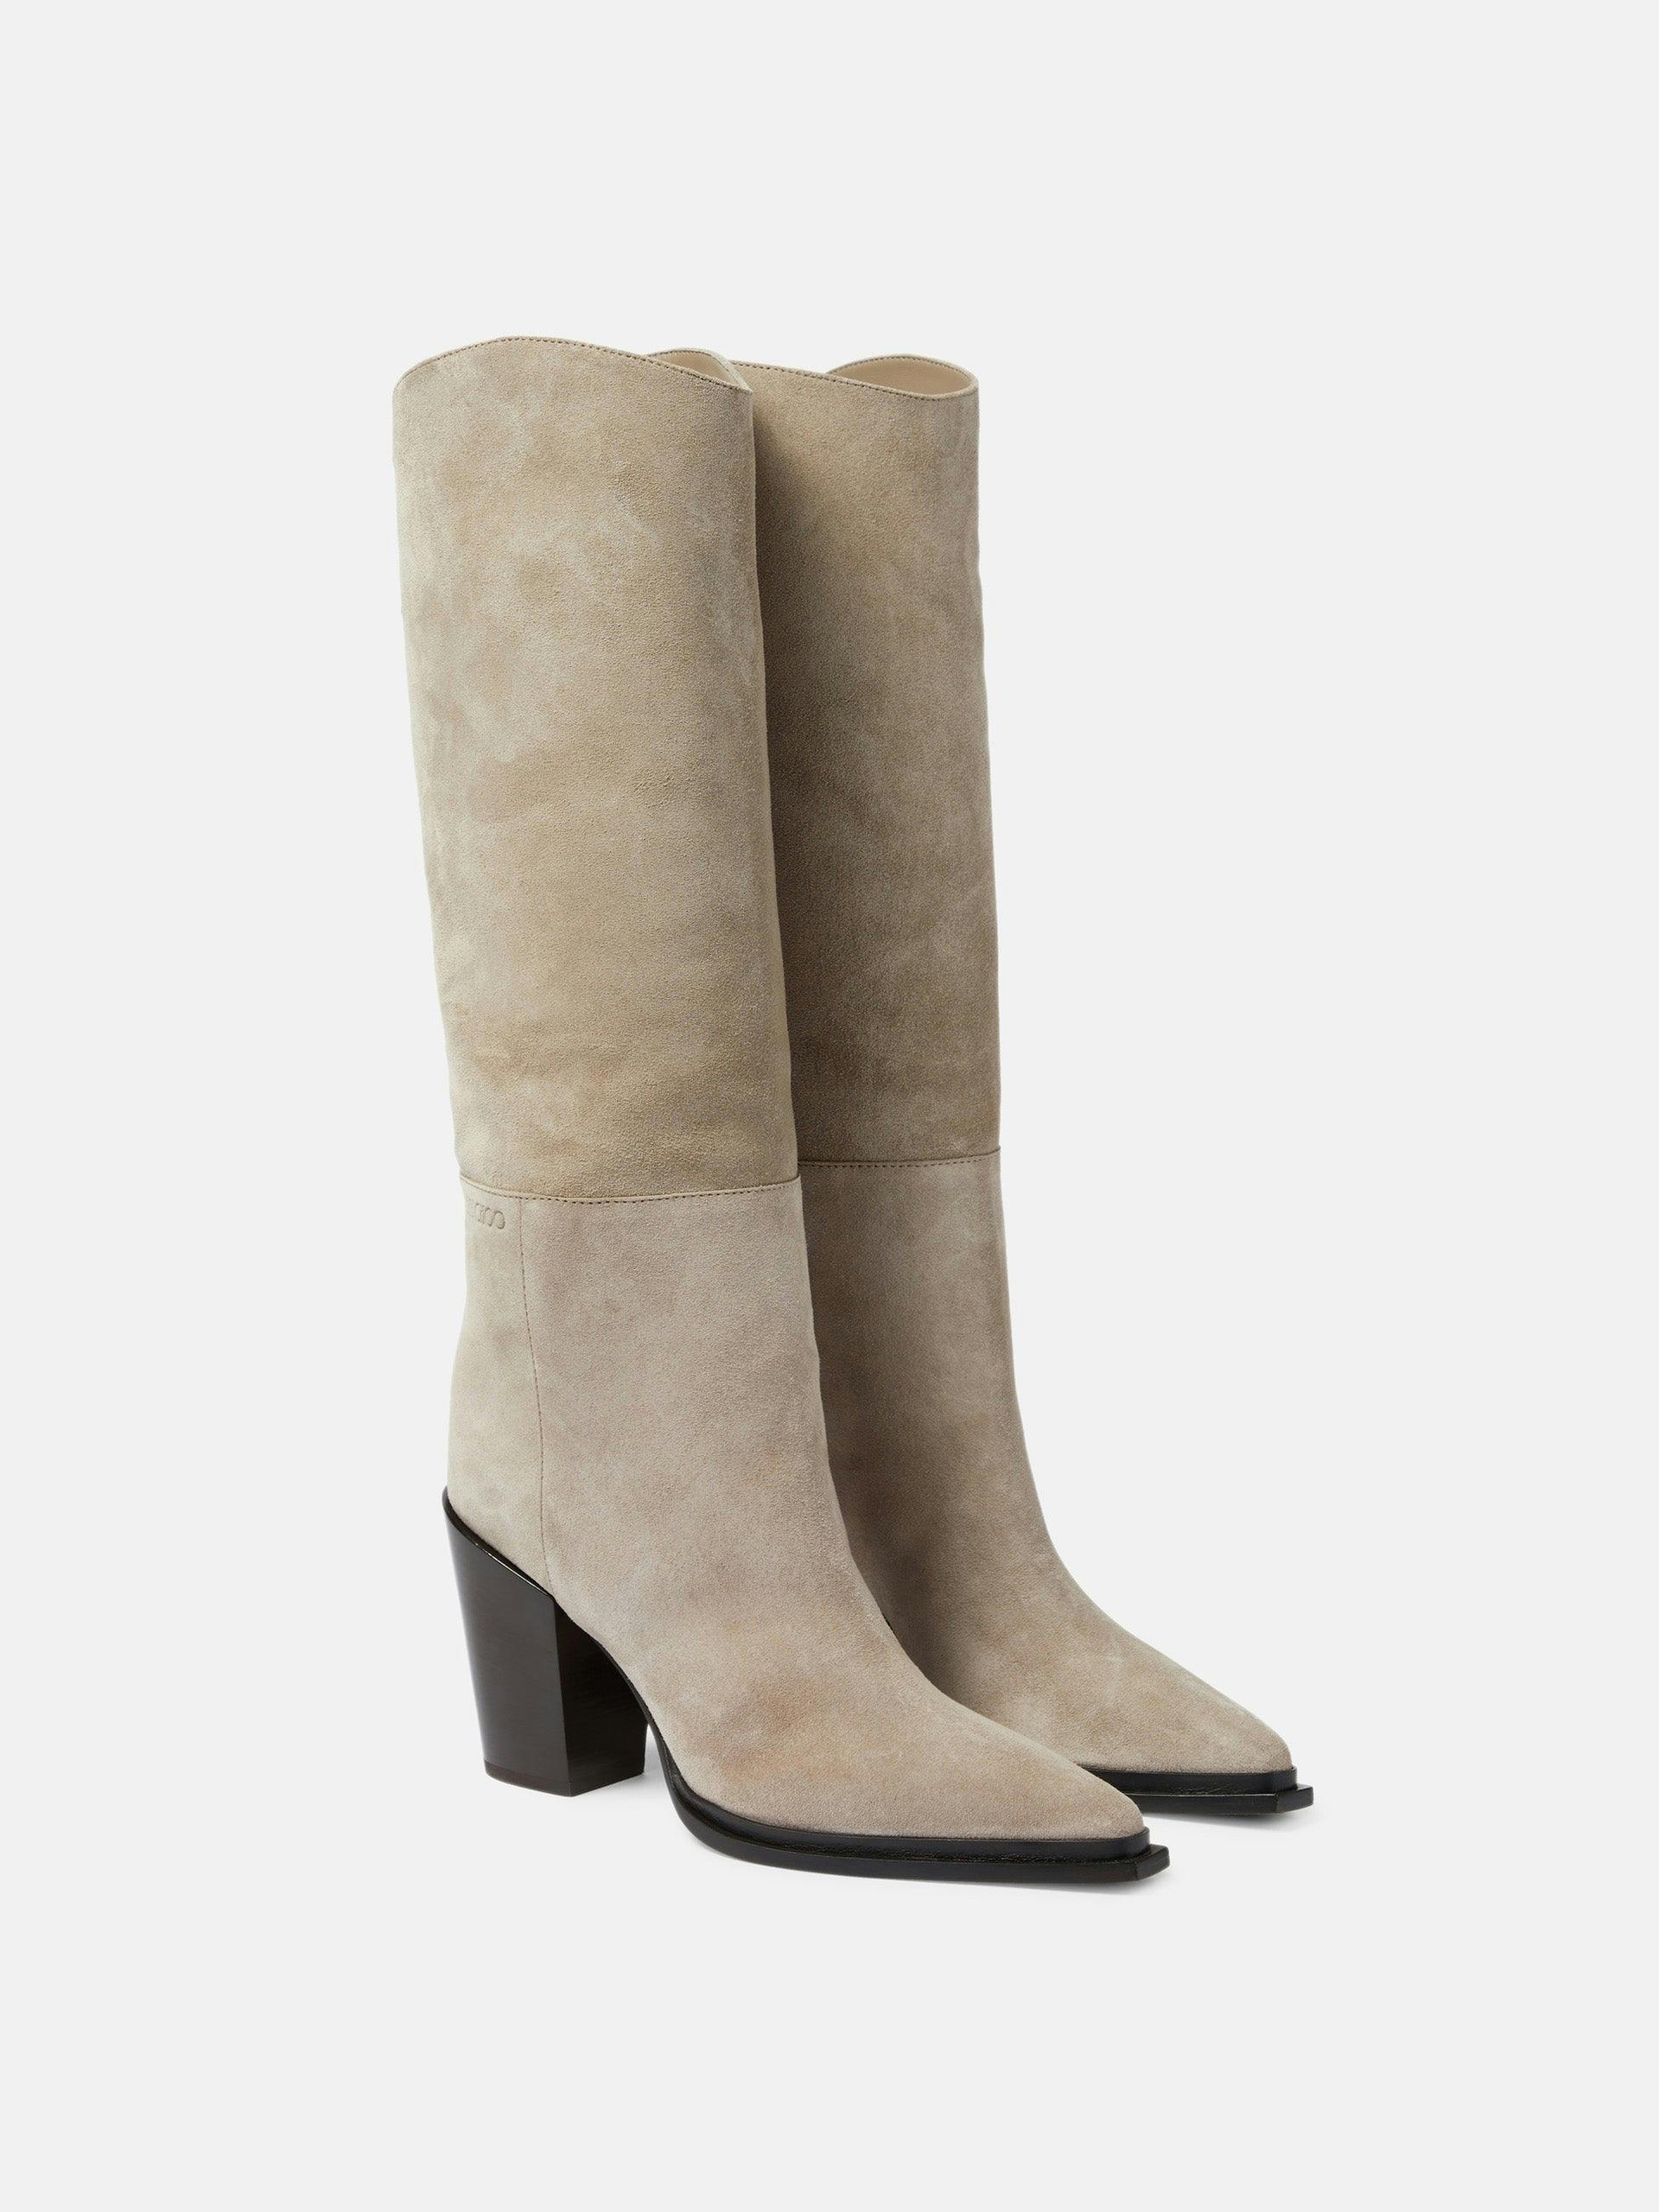 Cece 80 suede knee-high boots